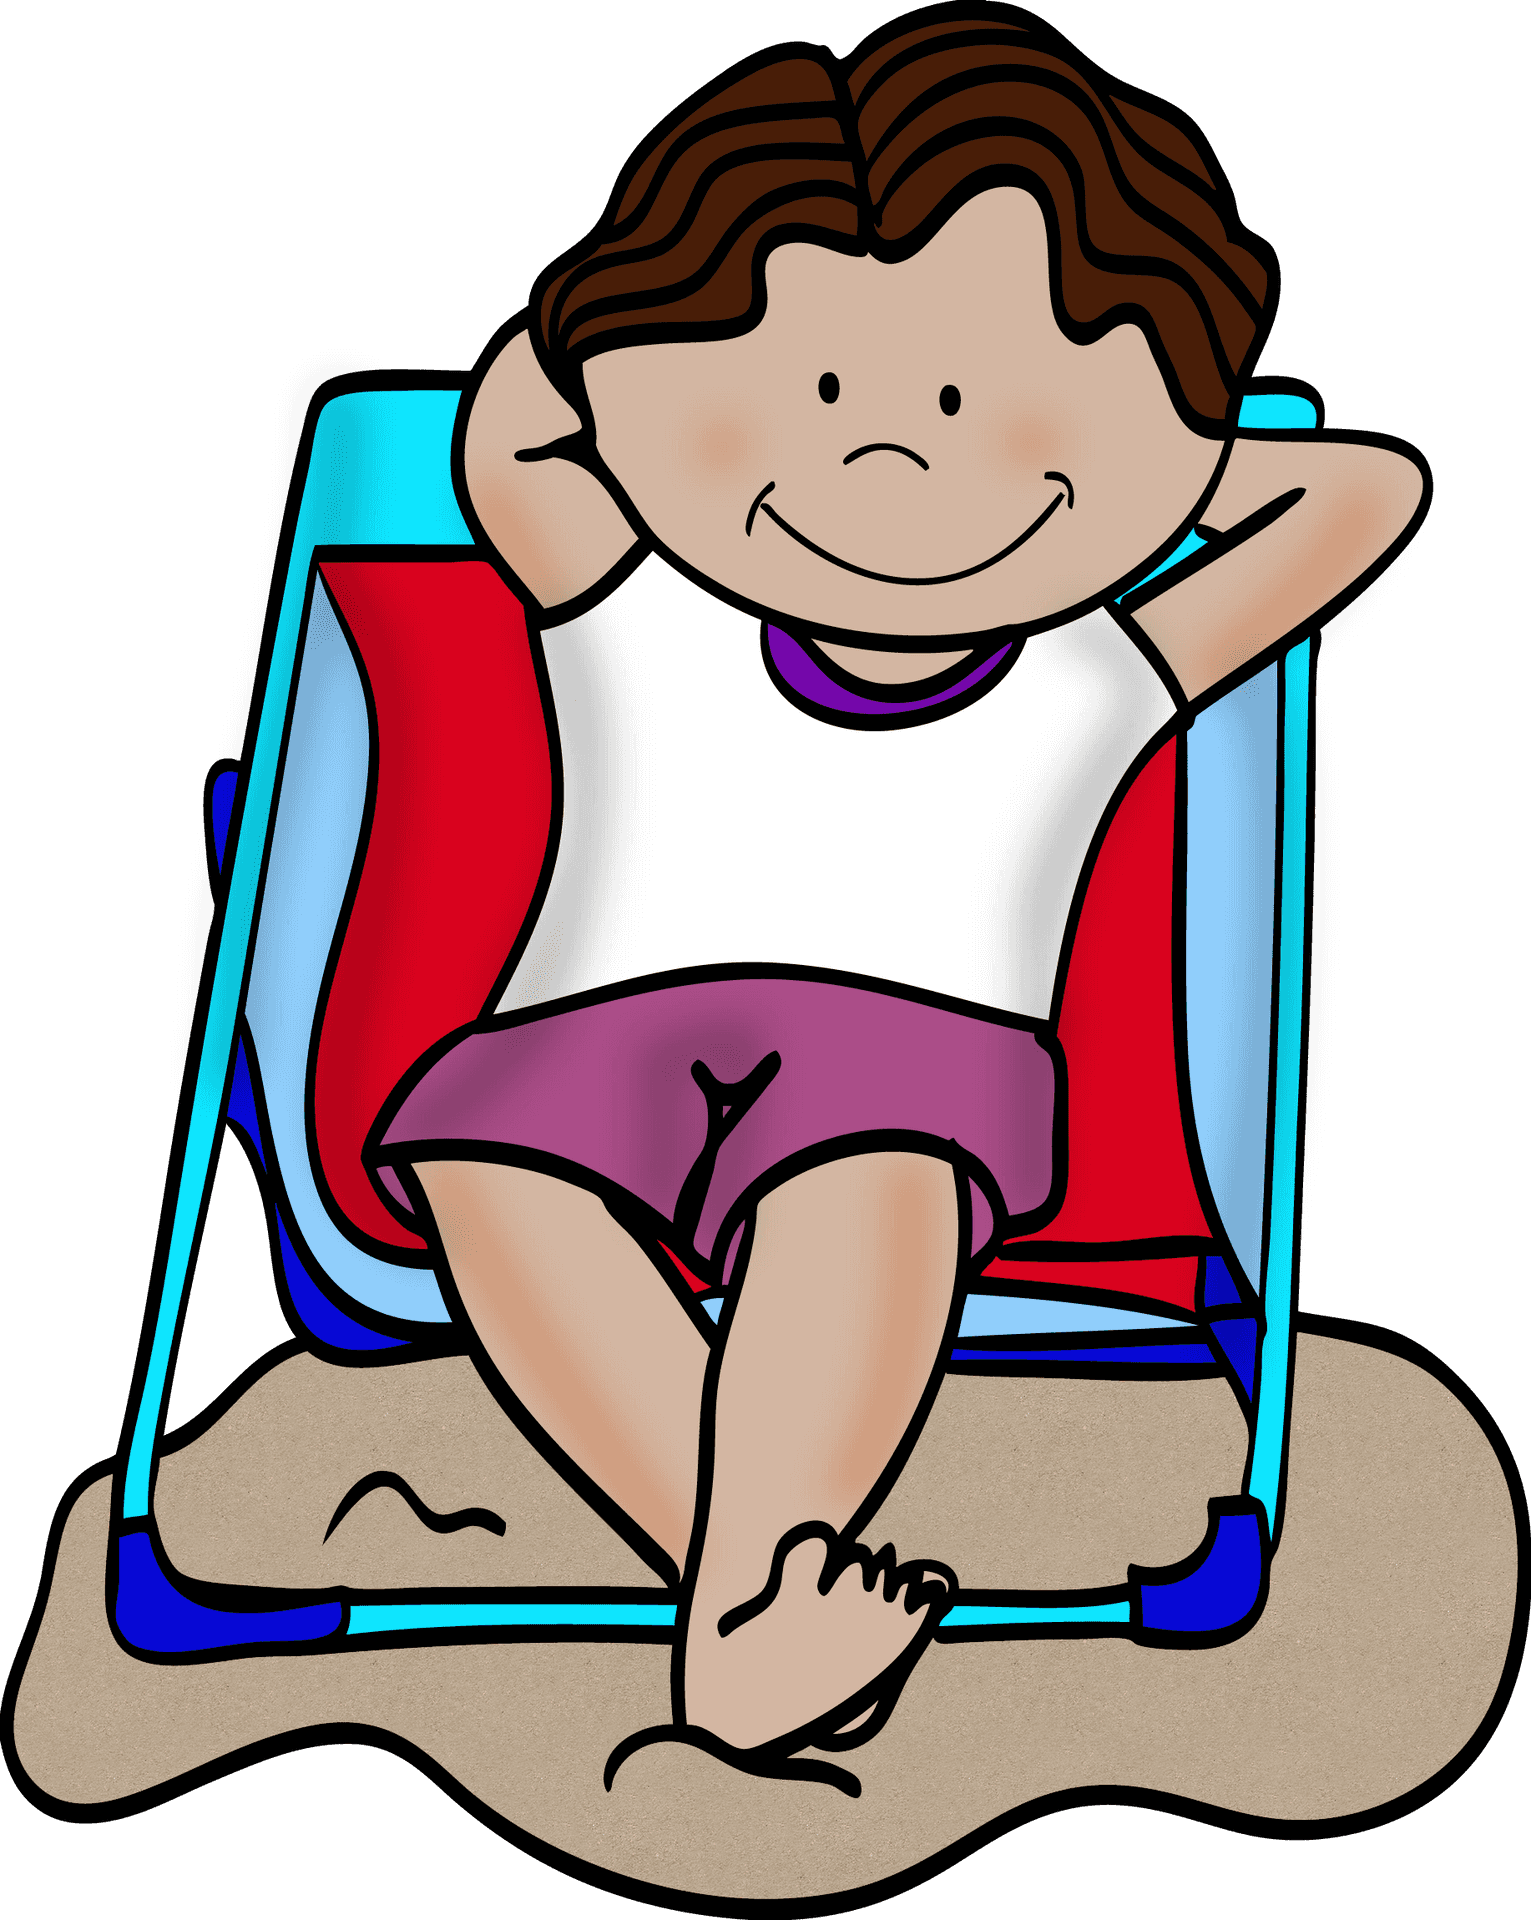 Beach Chair Relaxation Cartoon PNG image